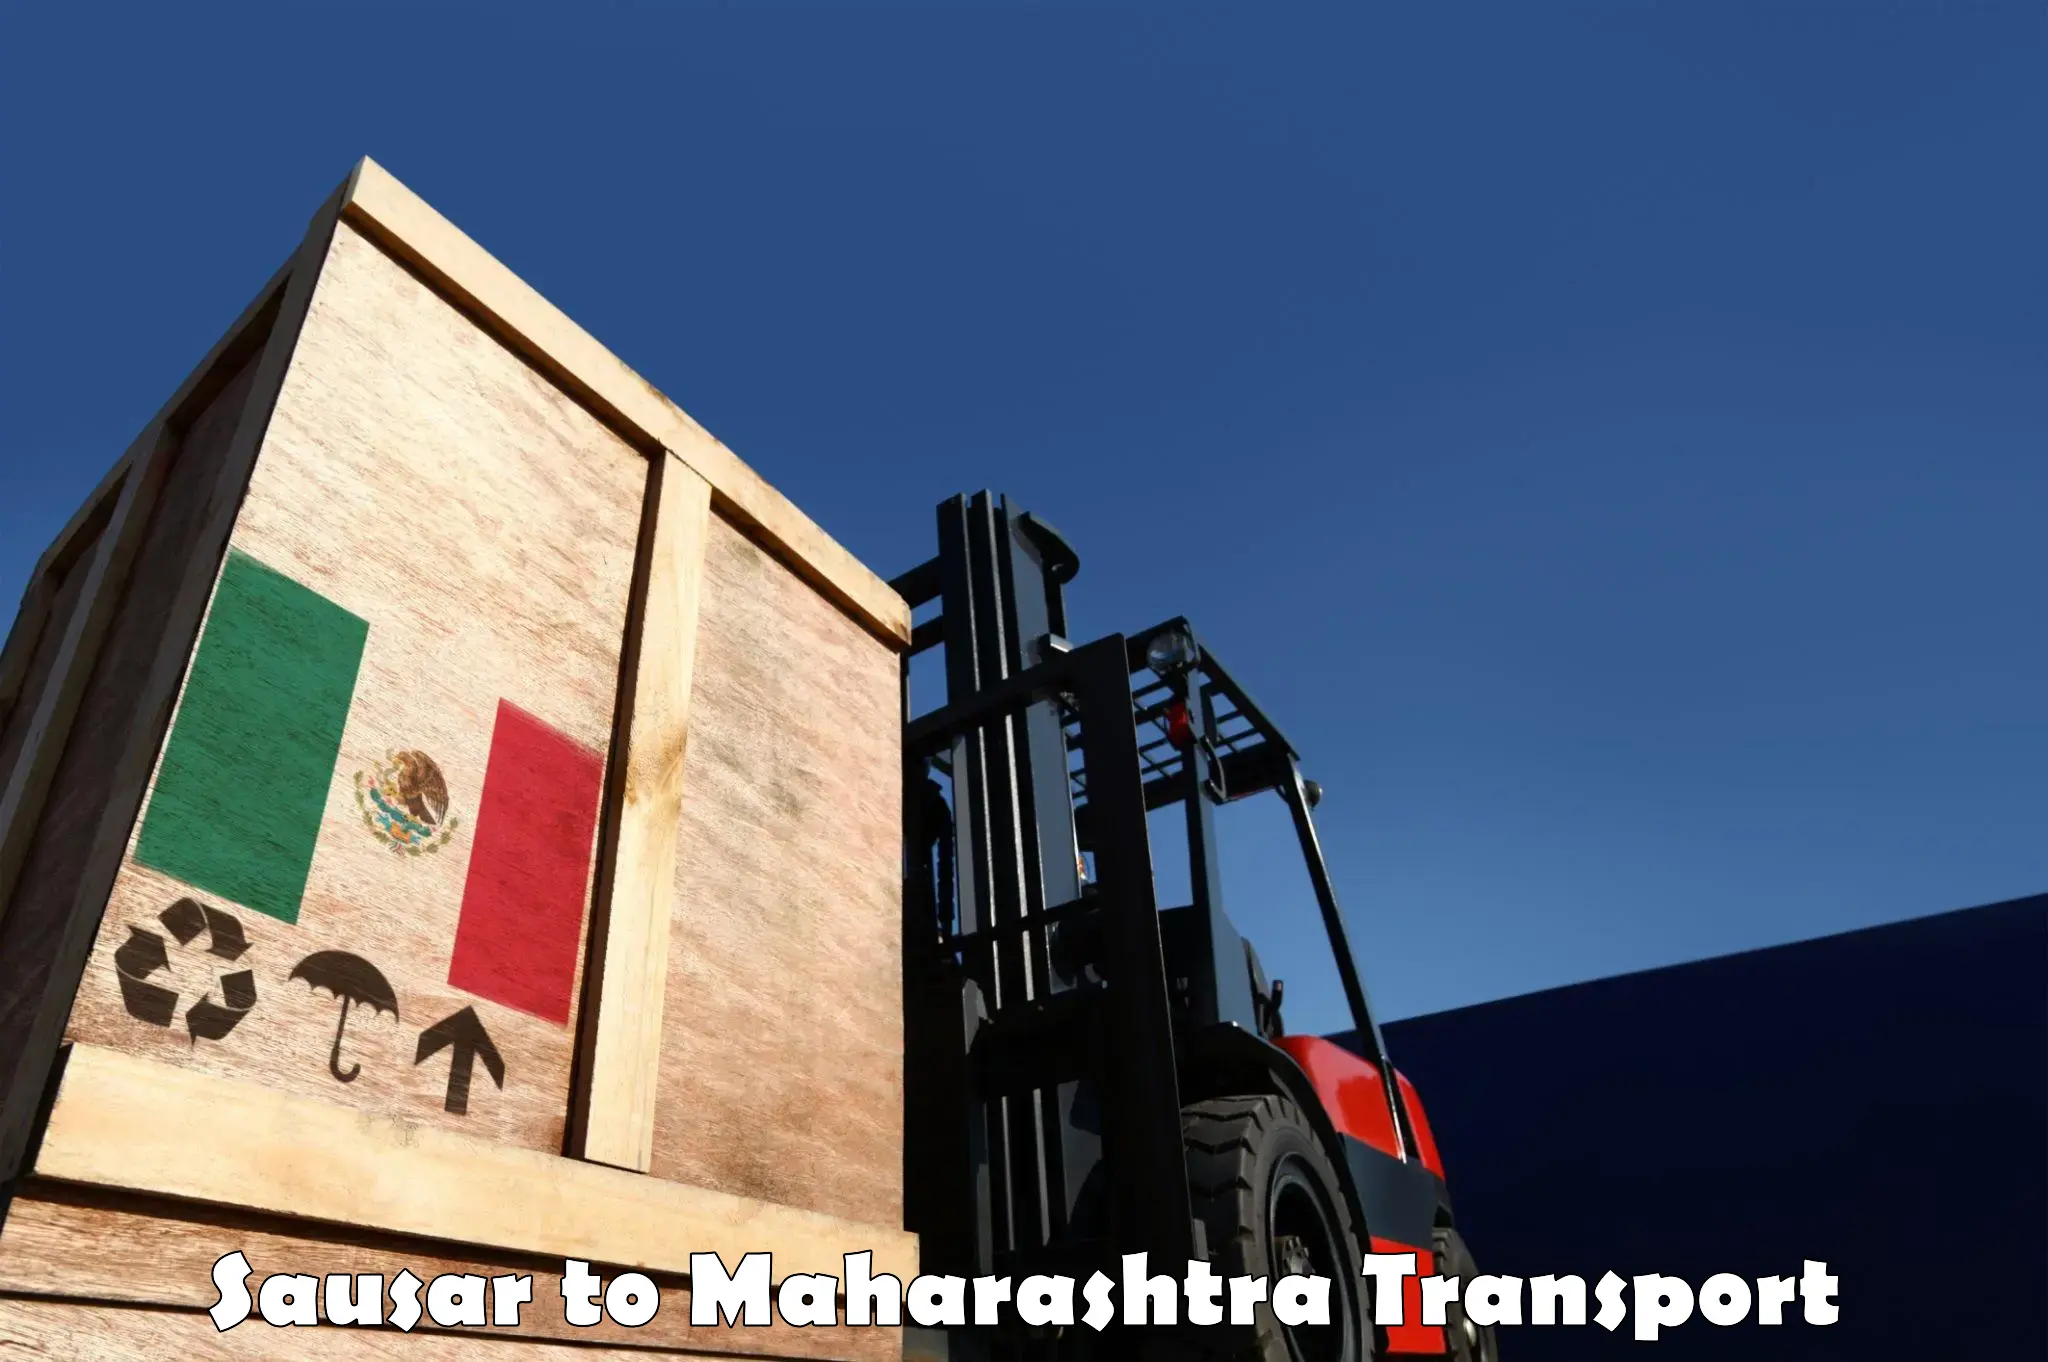 Truck transport companies in India Sausar to Karad